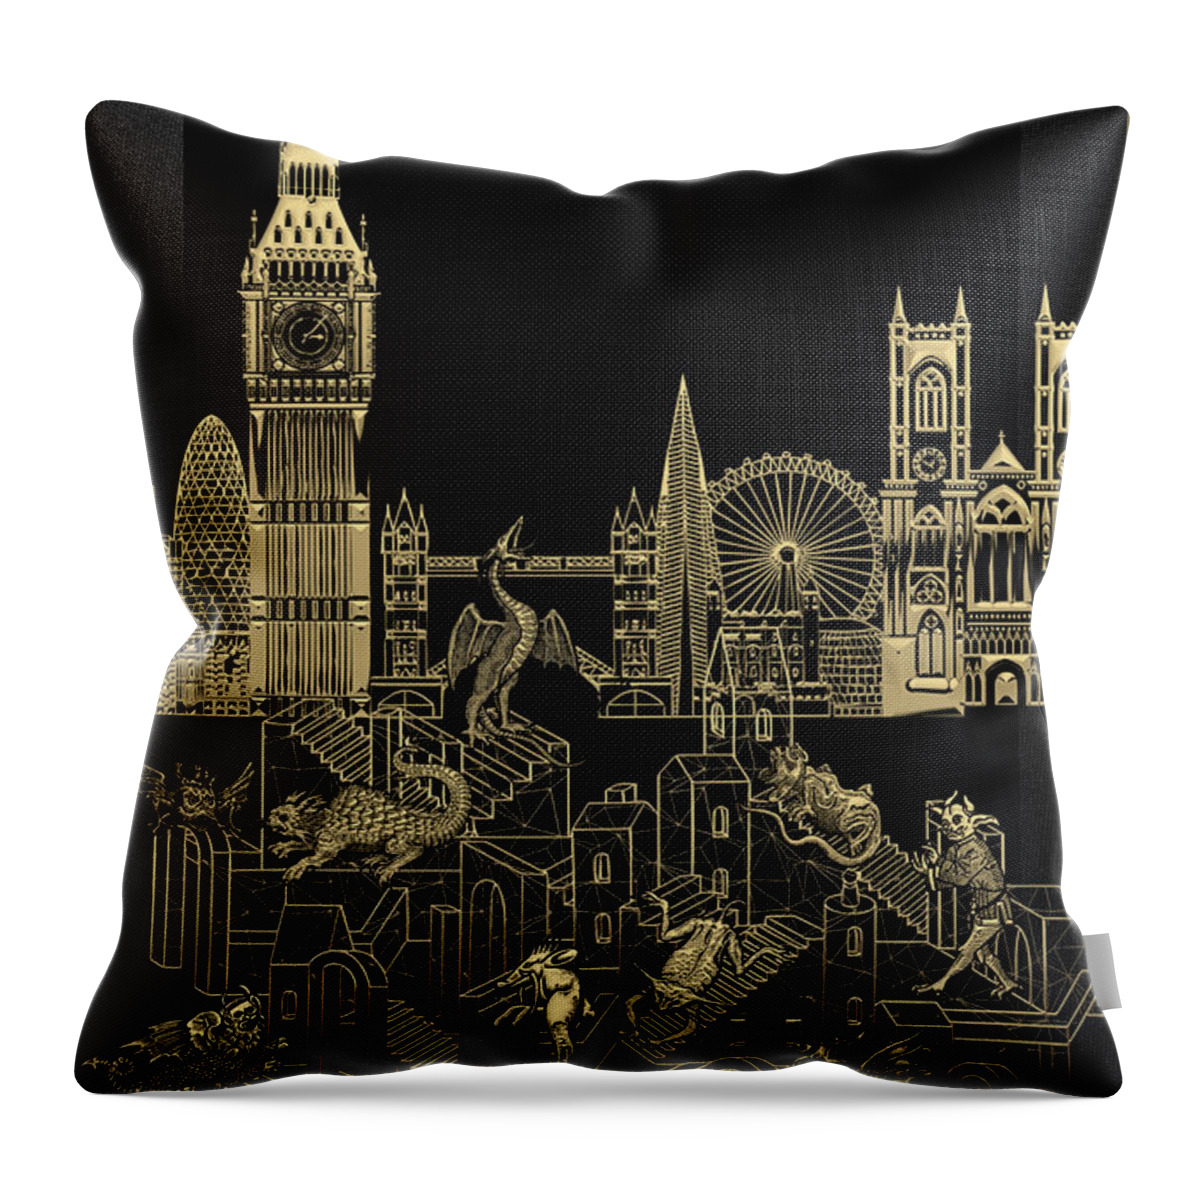 'the Underworlds' Collection By Serge Averbukh Throw Pillow featuring the digital art The Underworlds - Underground London by Serge Averbukh